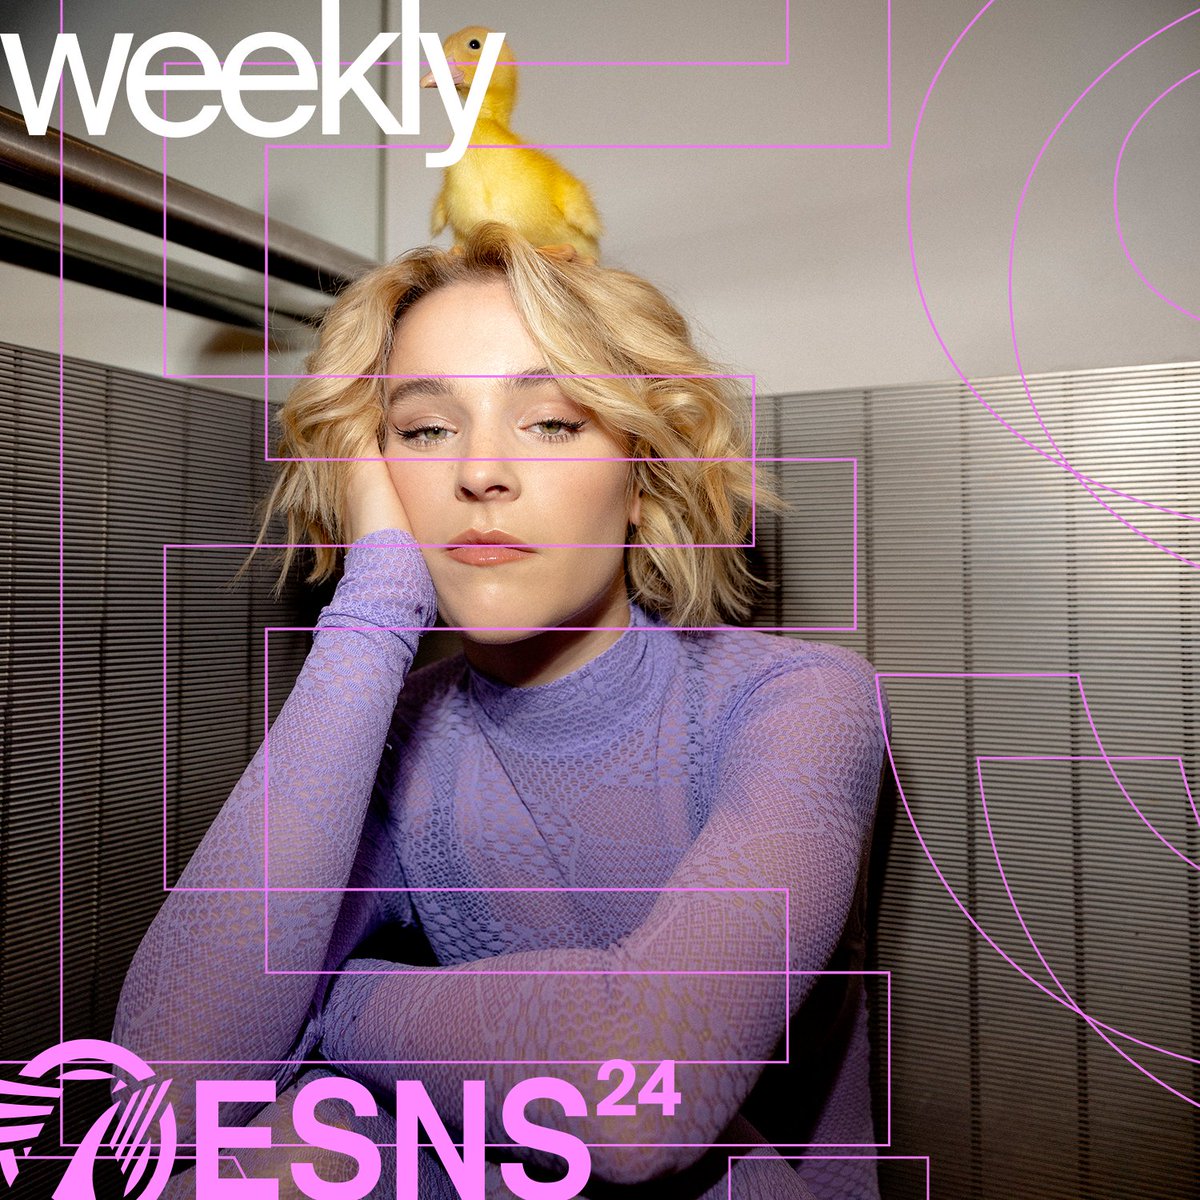 Hello! 🌞 Dive into the latest releases from #ESNS24 artists in our ESNS Weekly playlist. We've added songs from Pommelien Thijs, @FuseInfo, @usbandofficial, Jann, Kitty Florentine, MAURINO, @eddingtonagain, @fatdog_fatdog, LA ÉLITE and many more! 🔗 sdz.sh/T18YgK